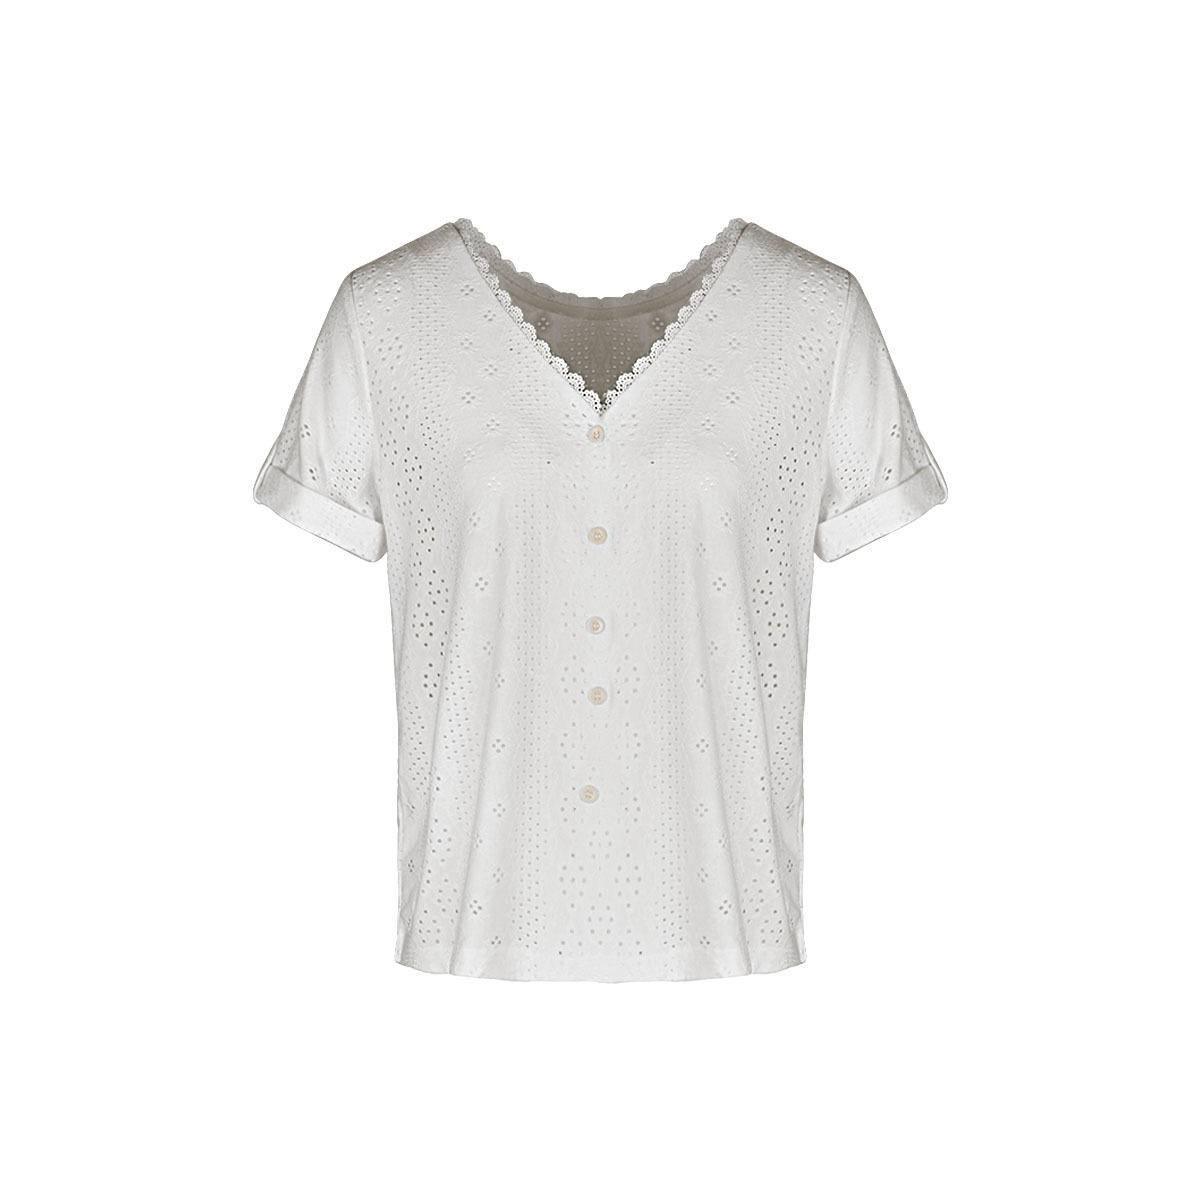 Look chic and stylish with our Lace Openwork V-Neck White Top - Order Today